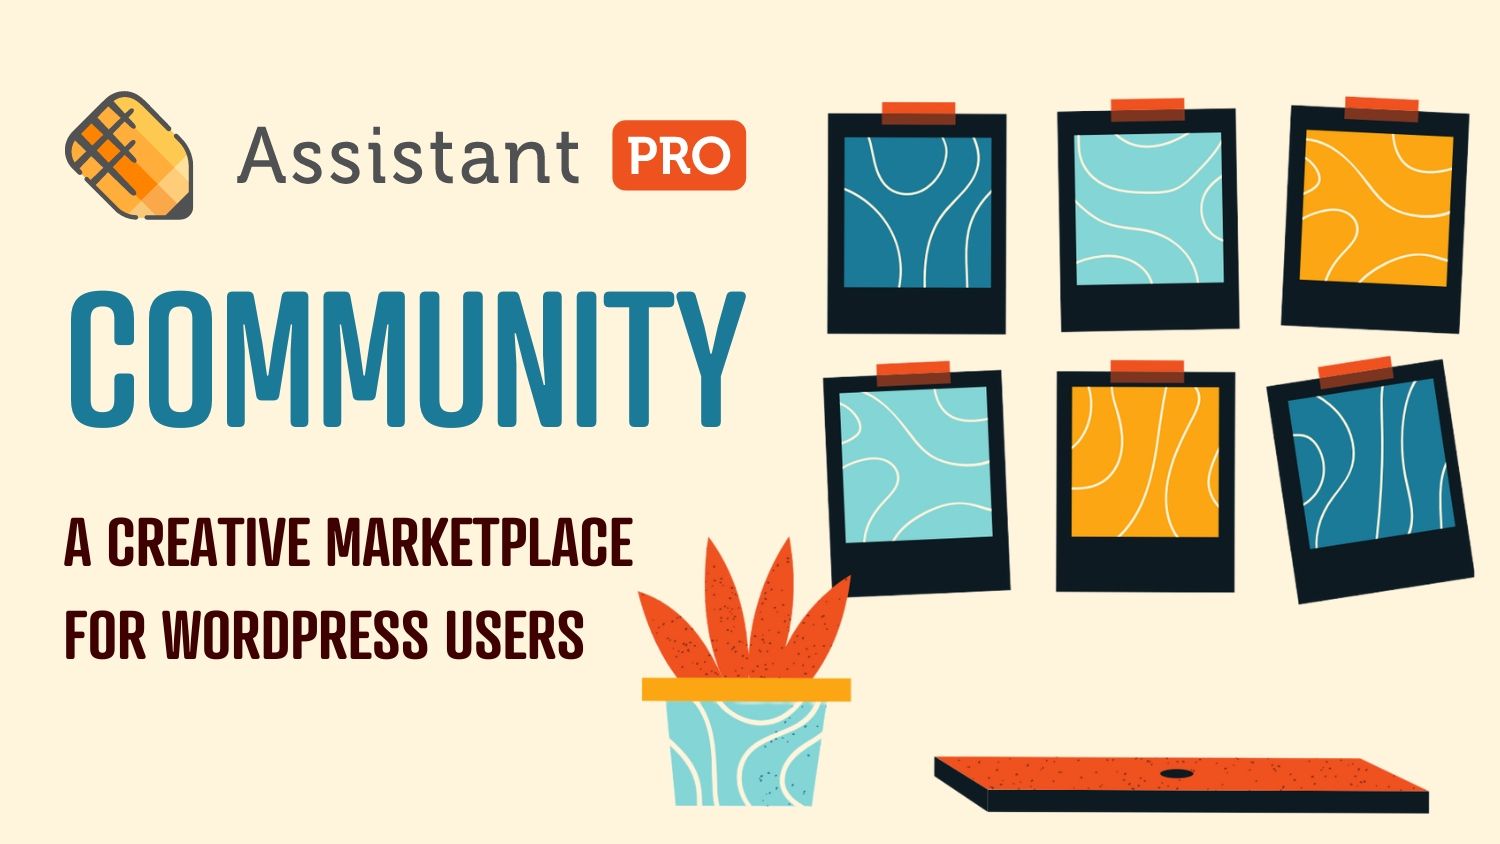 Assistant Pro Community: creative marketplace for WordPress designers and developers